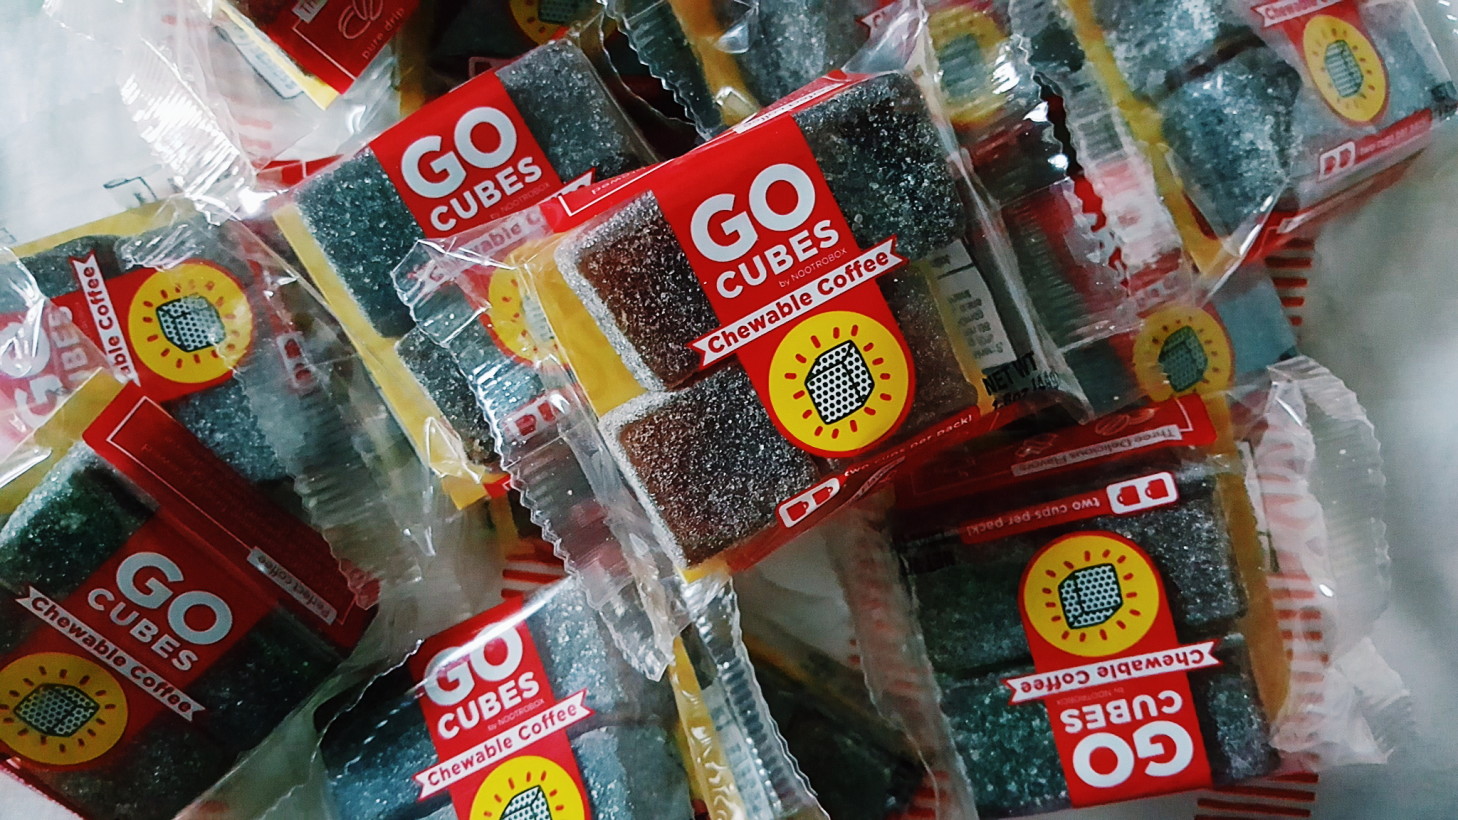 I tried Go Cubes chewable coffee, and I’m pretty sure this is what cocaine feels like photo